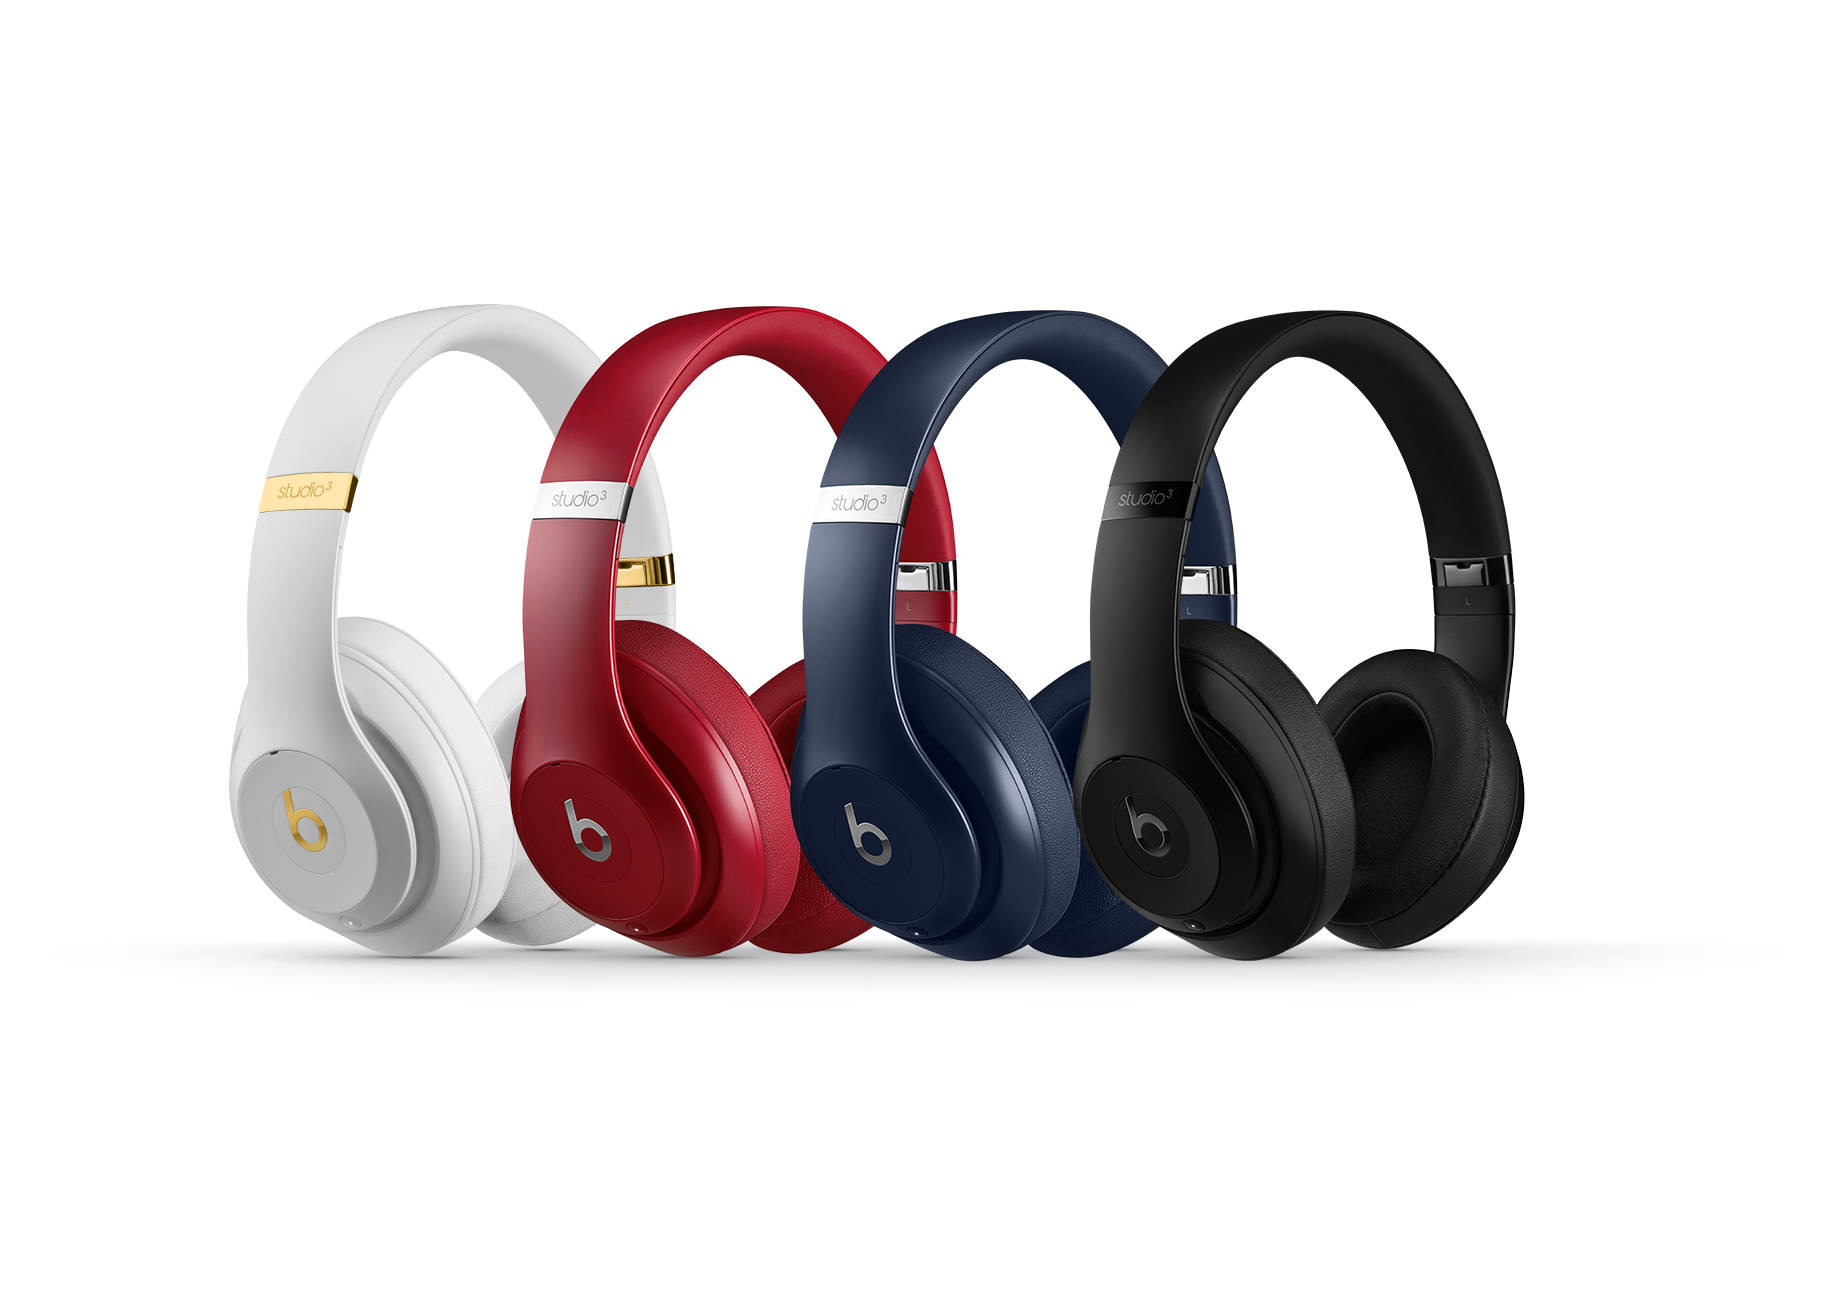 Beats by Dr. Dre Launches Most Advanced Headphone, Beats Studio3 Wireless, Delivering an Incredible Sound Solution for Noise-Canceling Headphones | Business Wire